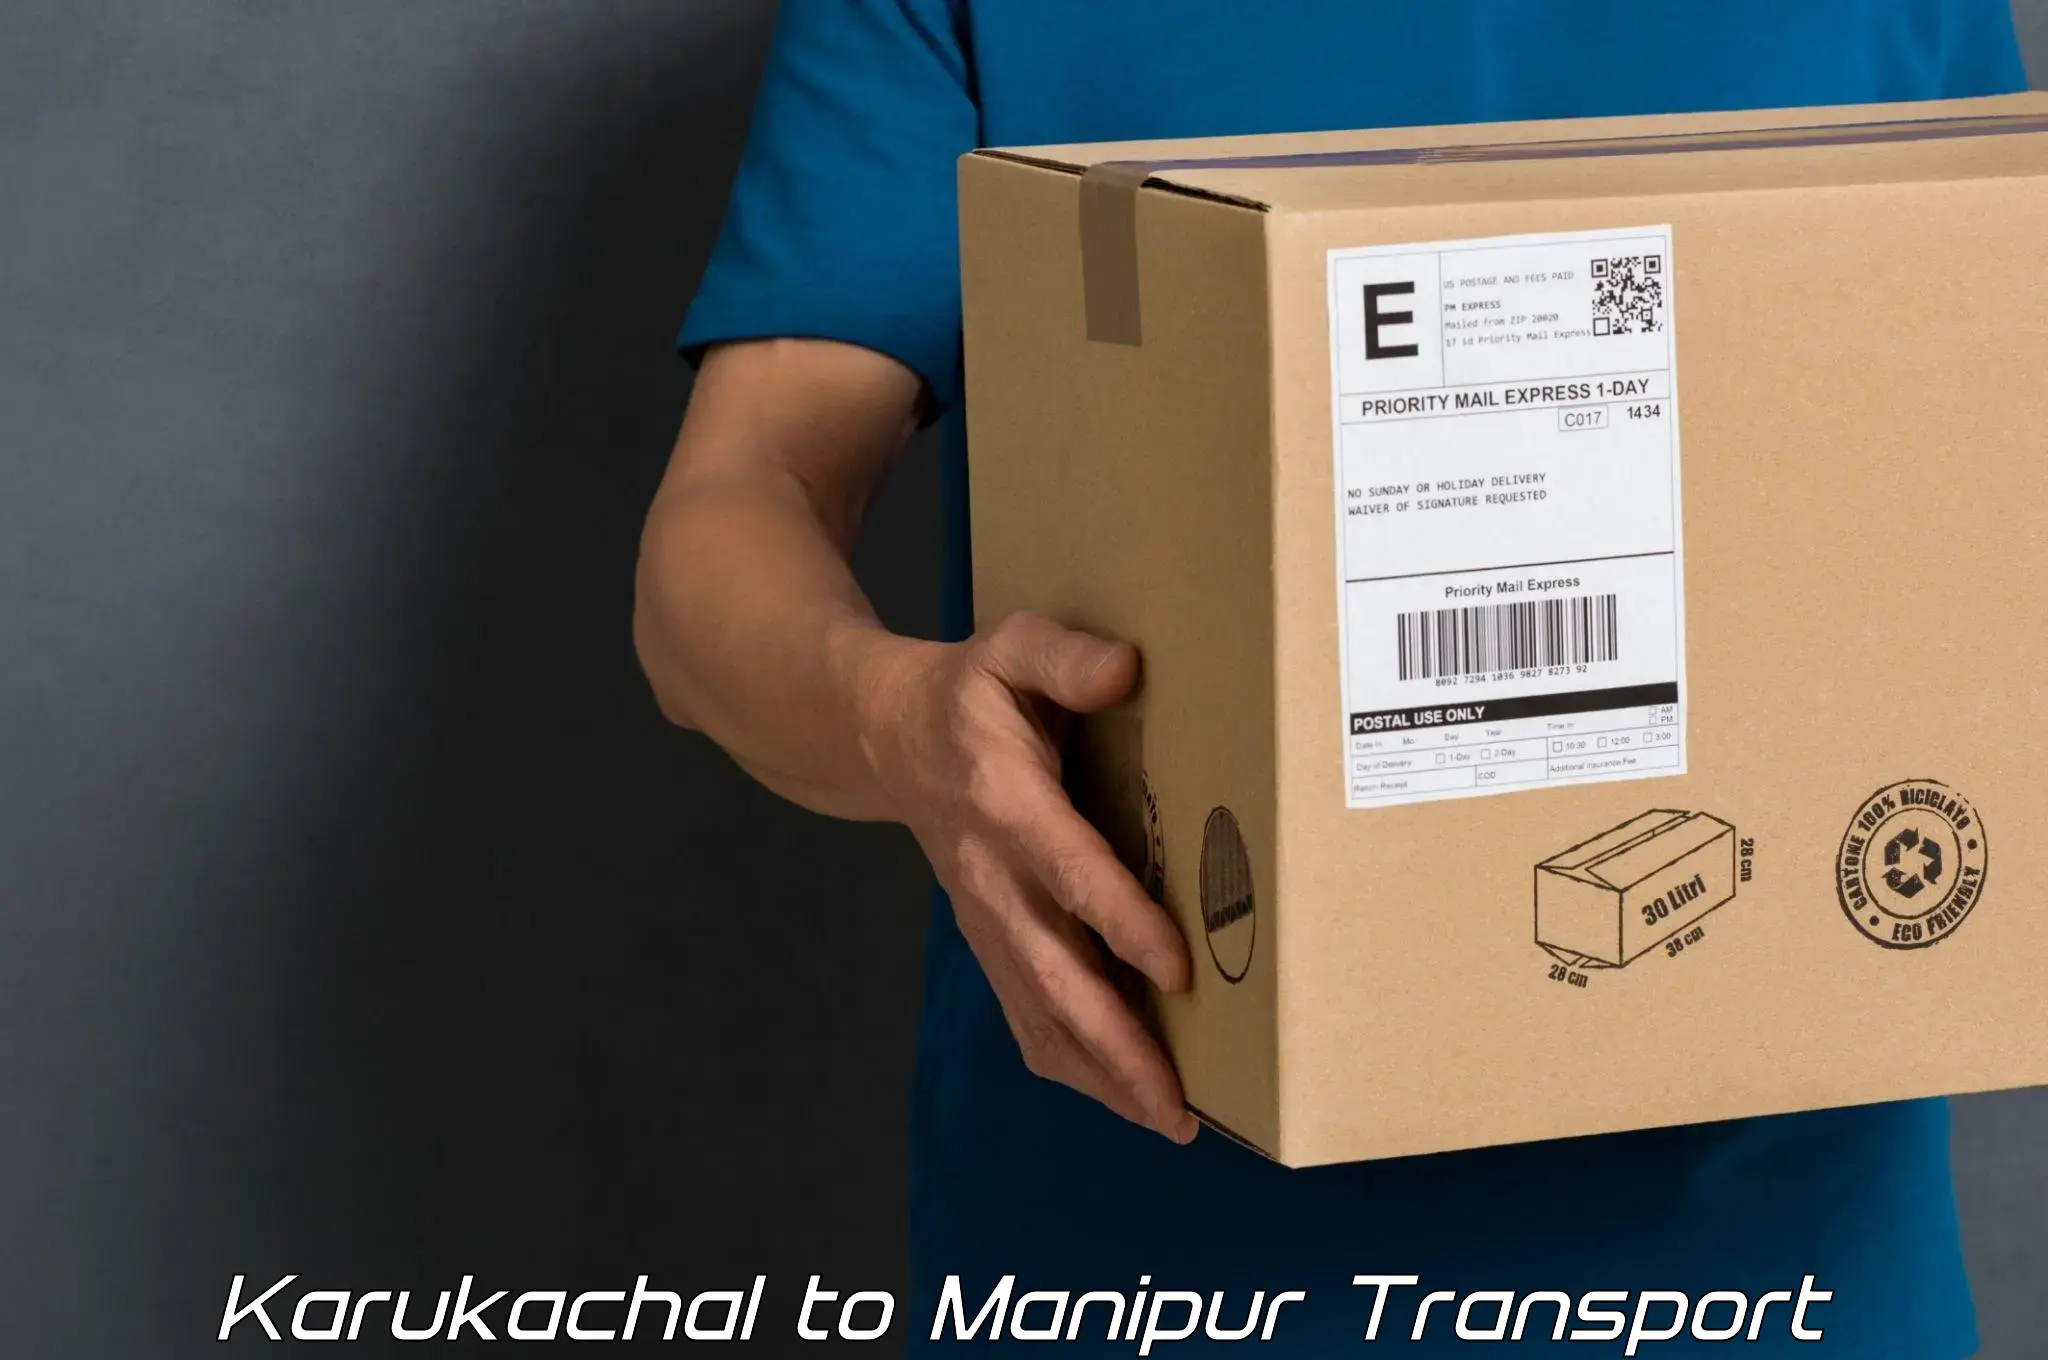 Delivery service Karukachal to Manipur